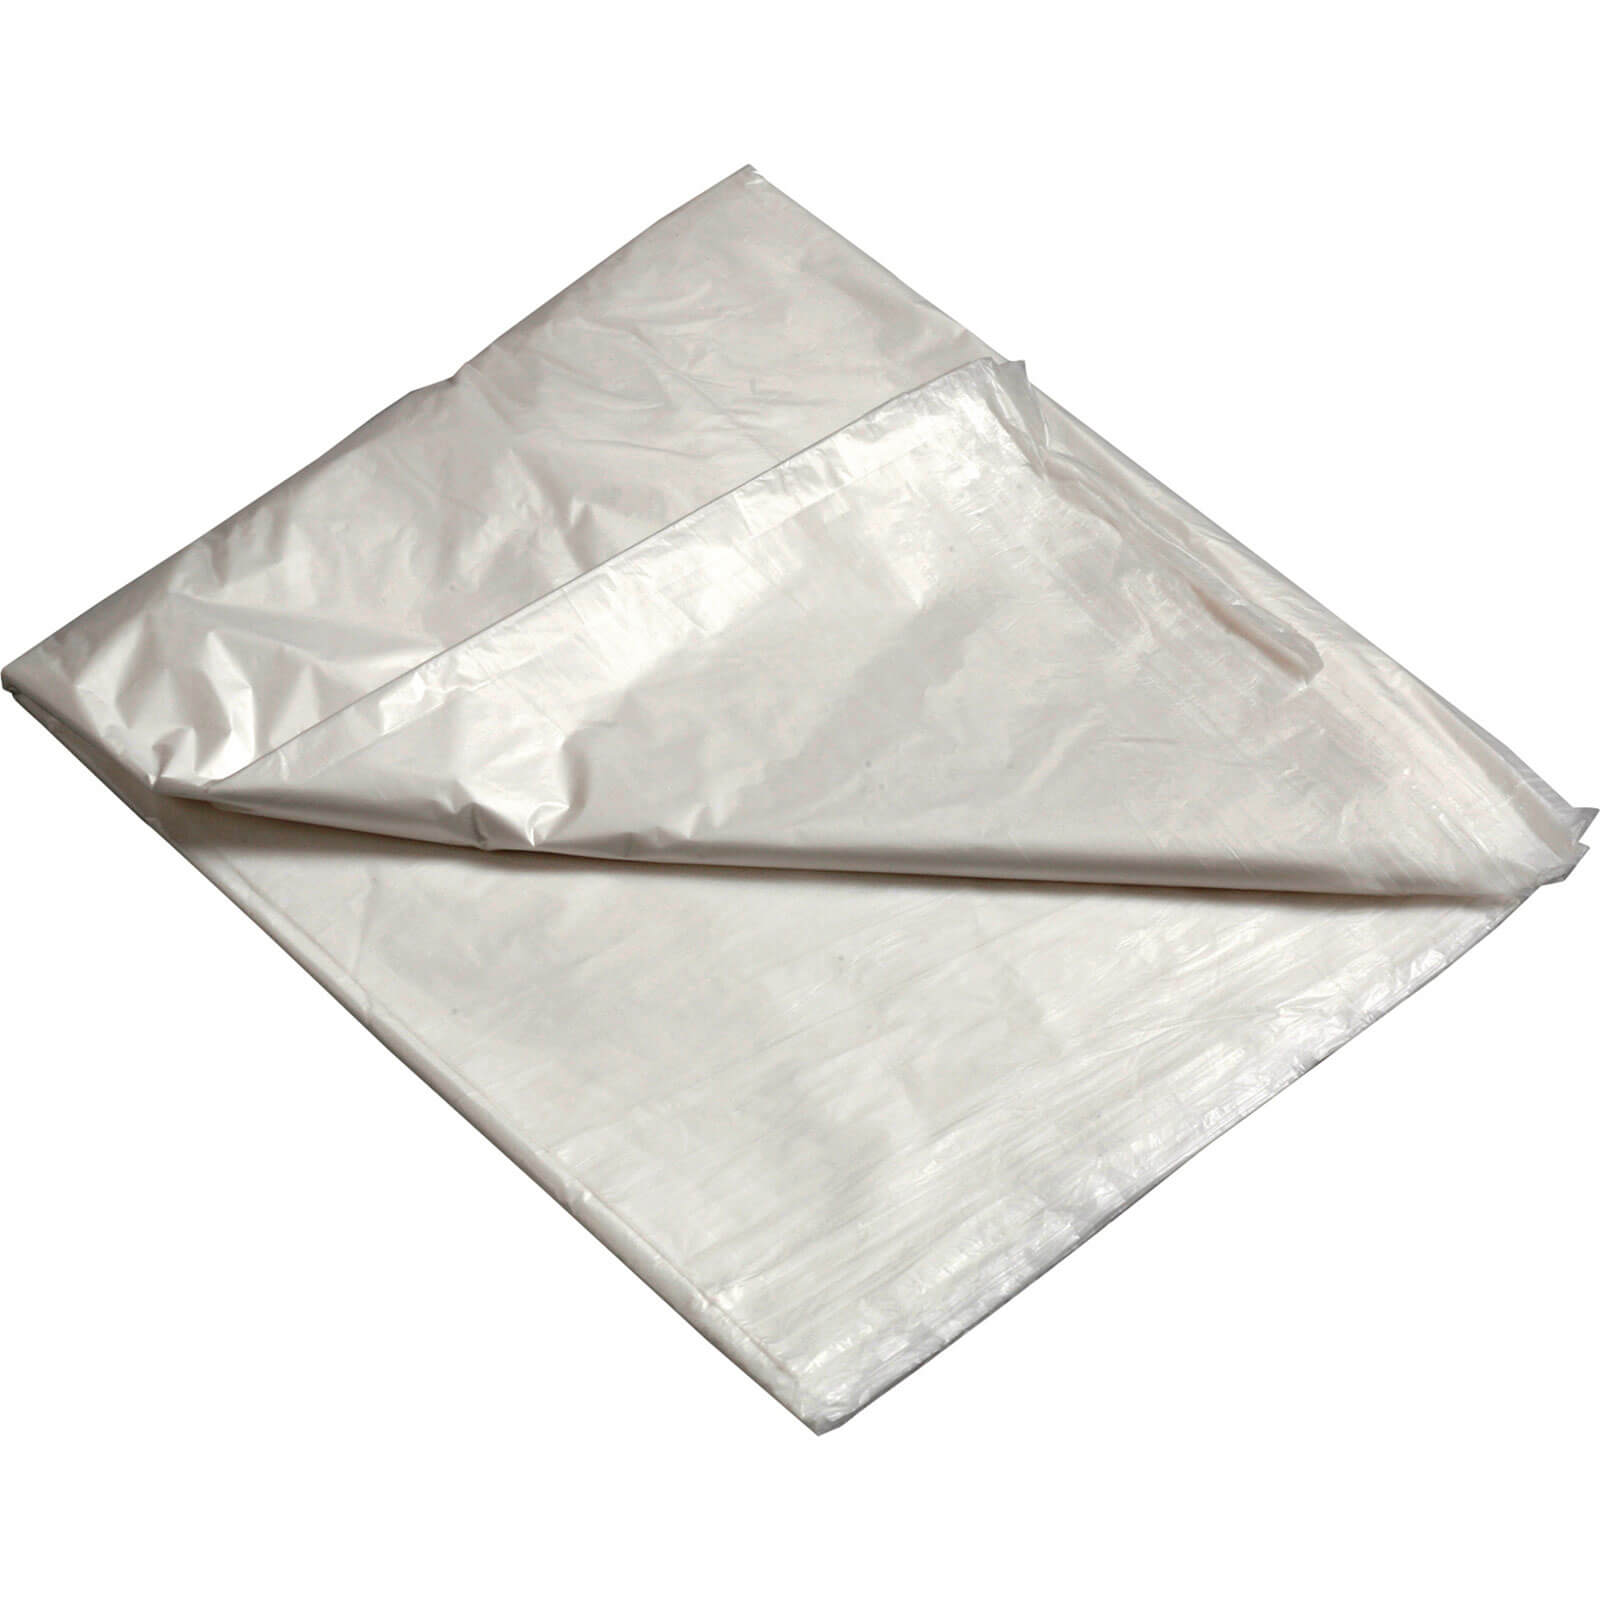 Image of Stanley Polythene Dust Sheets 3.6m 2.7m Pack of 1